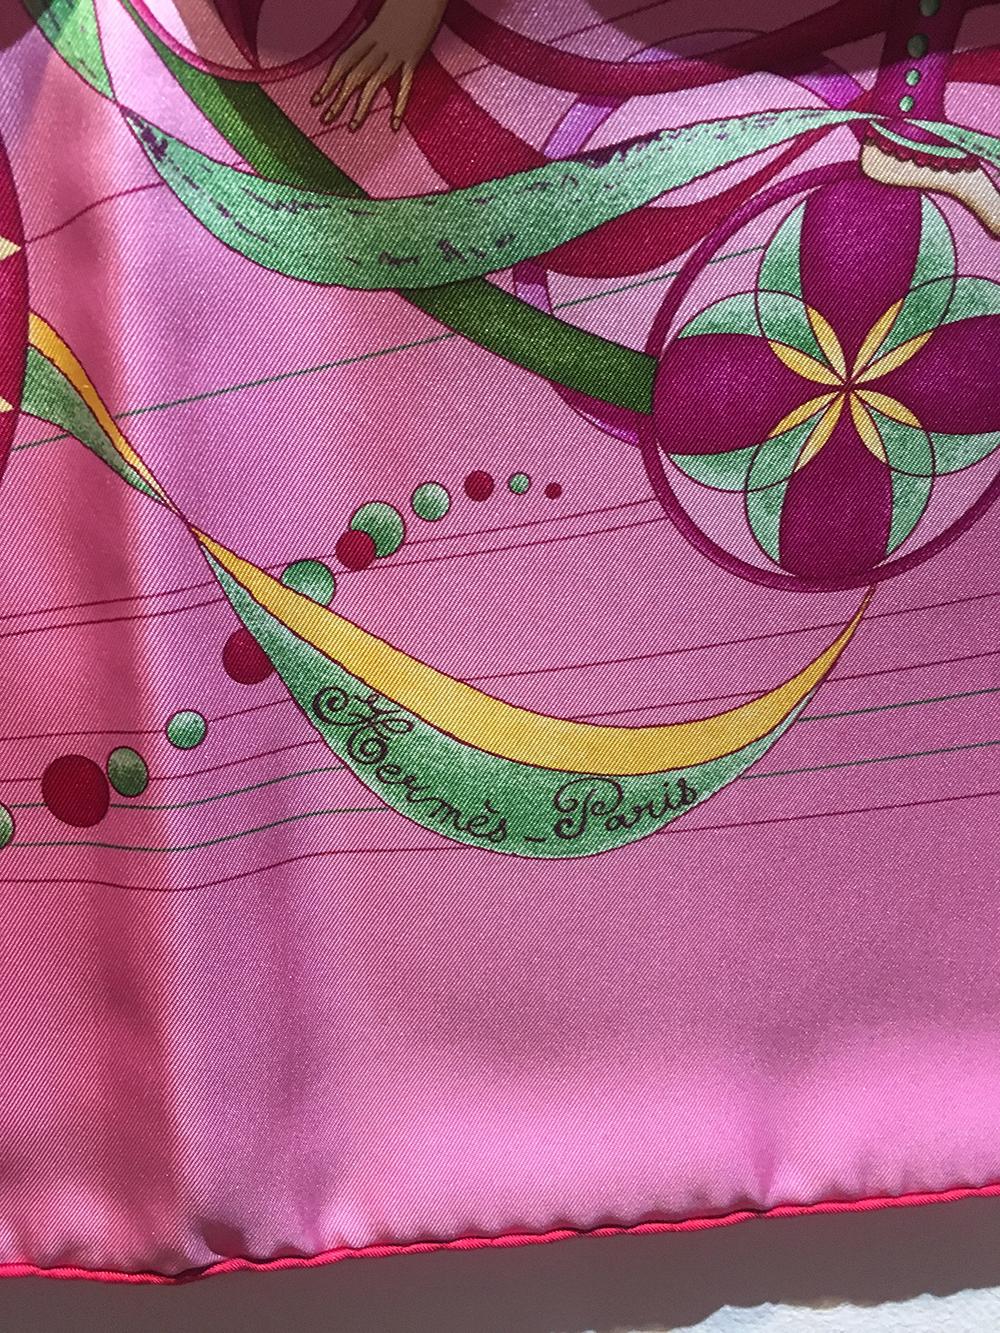 Hermes La Danse du Cosmos Silk Scarf in Pink in excellent condition. Original silk screen design c2007 by Zoé Pauwels features 3 dancers with a beautiful multicolor green, pink, red, yellow, and magenta ribbon, dot, and geometrical cylindrical print